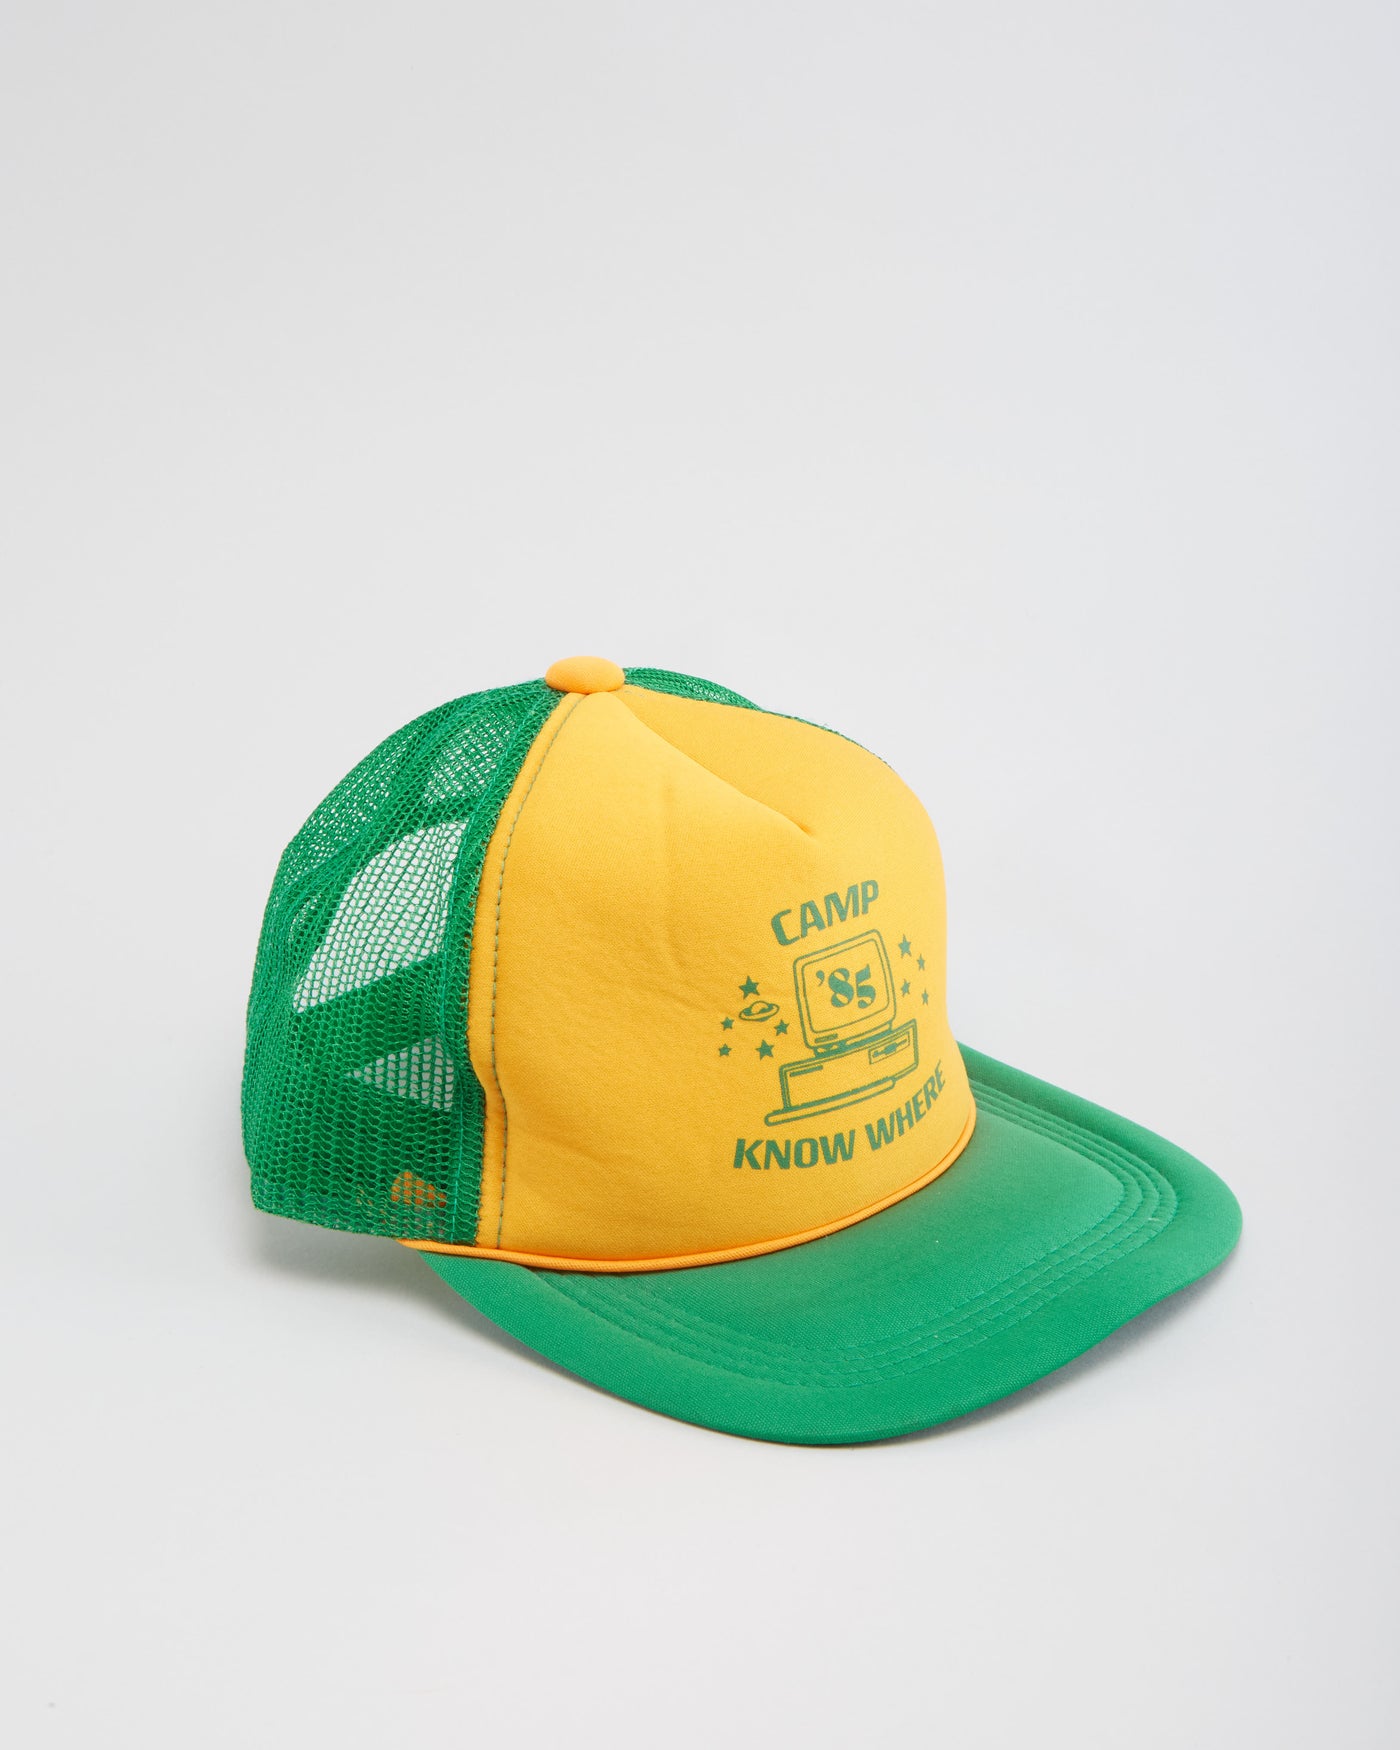 Stranger Things Camp Know Where '85 Green / Yellow Trucker Hat